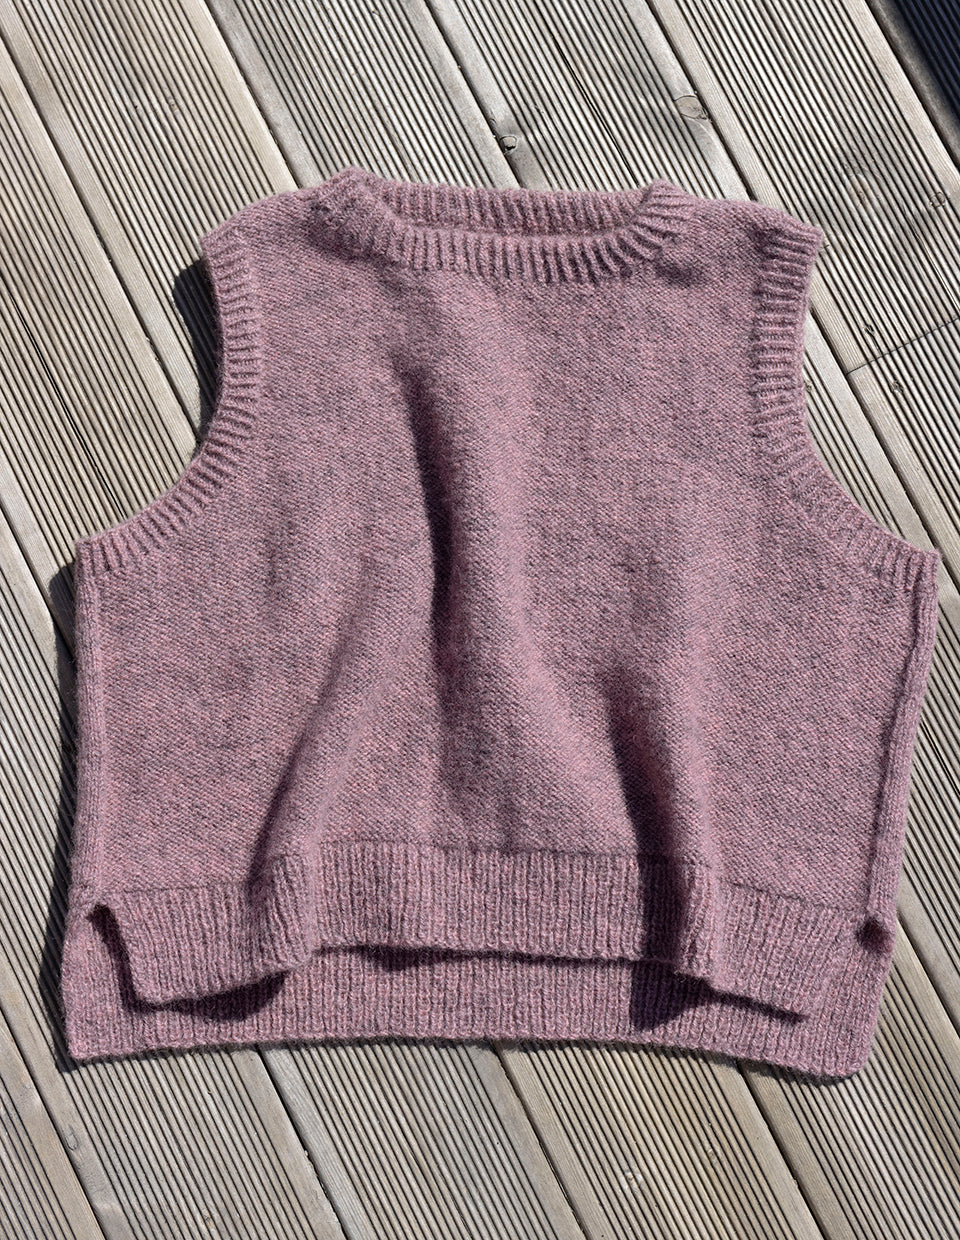 Straight vest, an easy to knit vest in 2-ply yarn, knitting kit